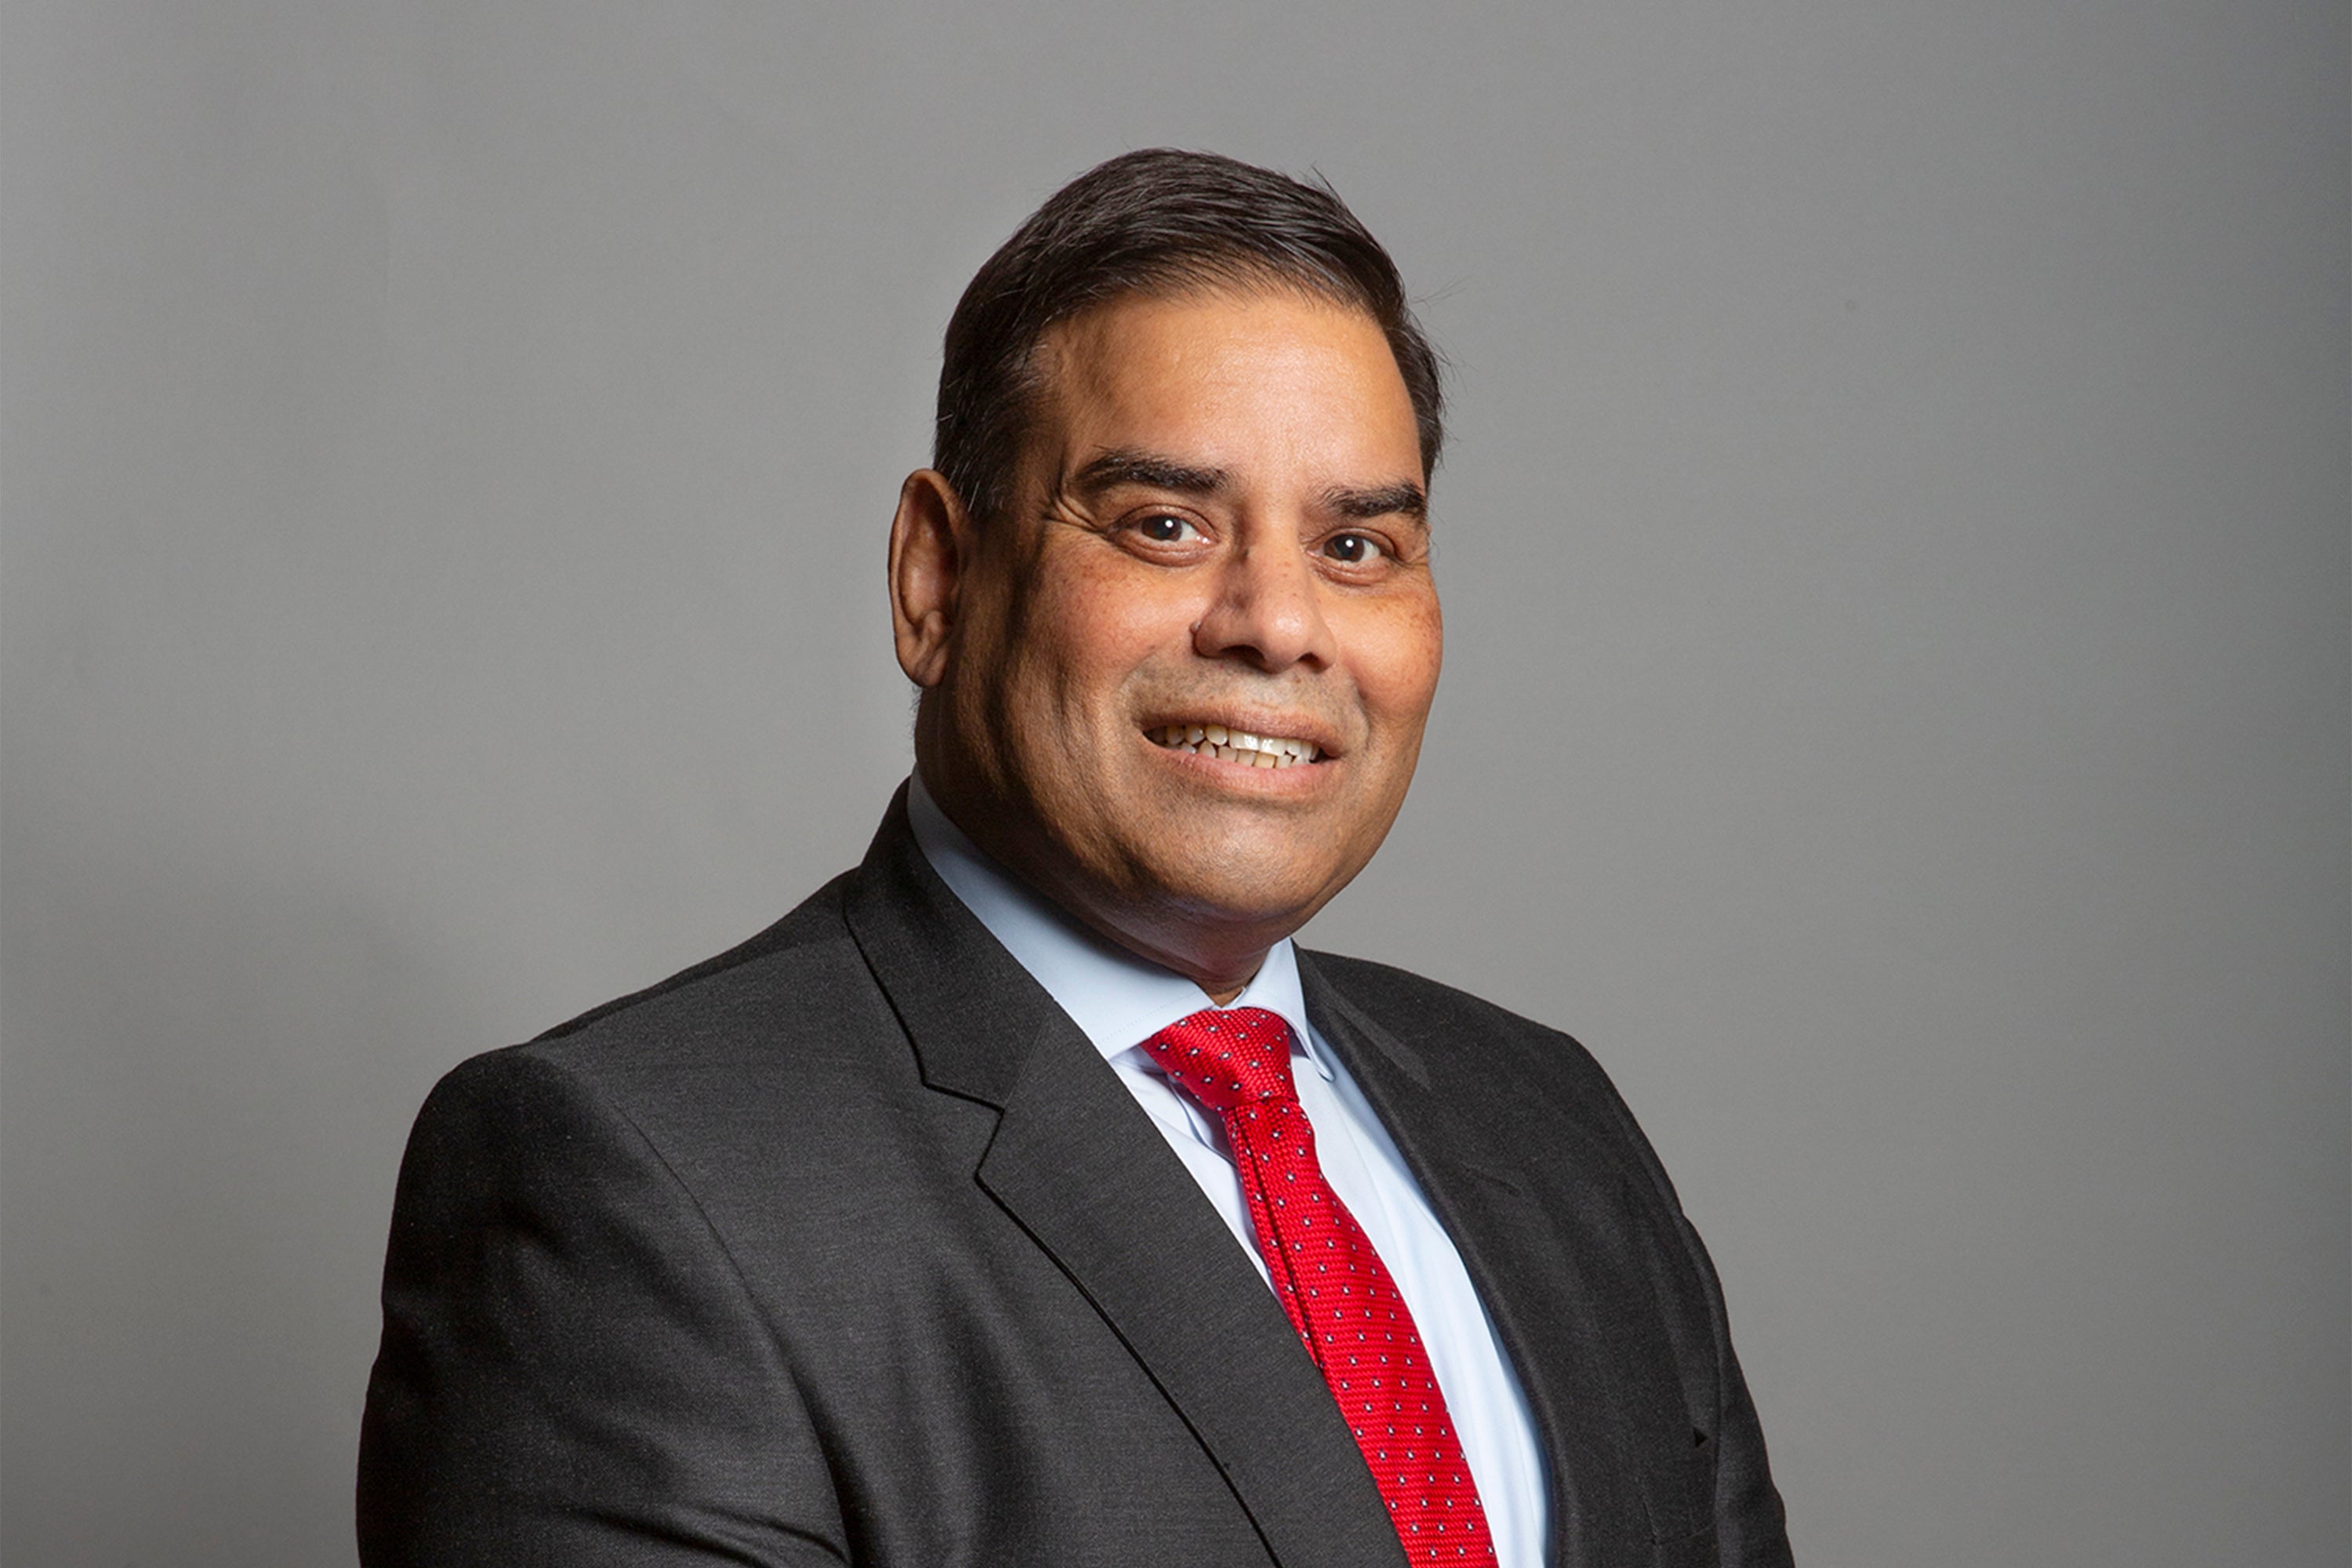 Stepping down: The Labour MP for Birmingham Perry Barr, Khalid Mahmood